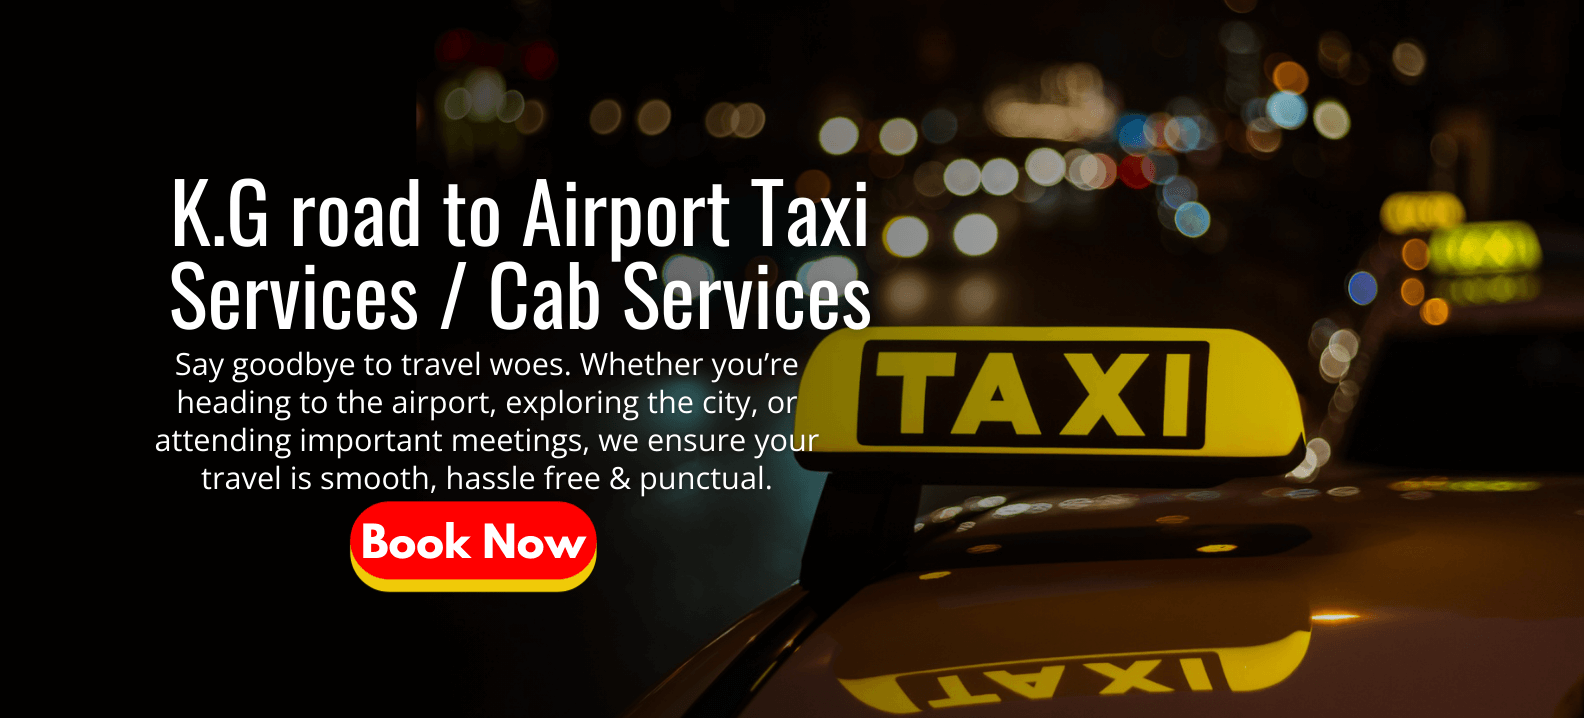 K.G road to Airport Taxi Services _ Cab Services